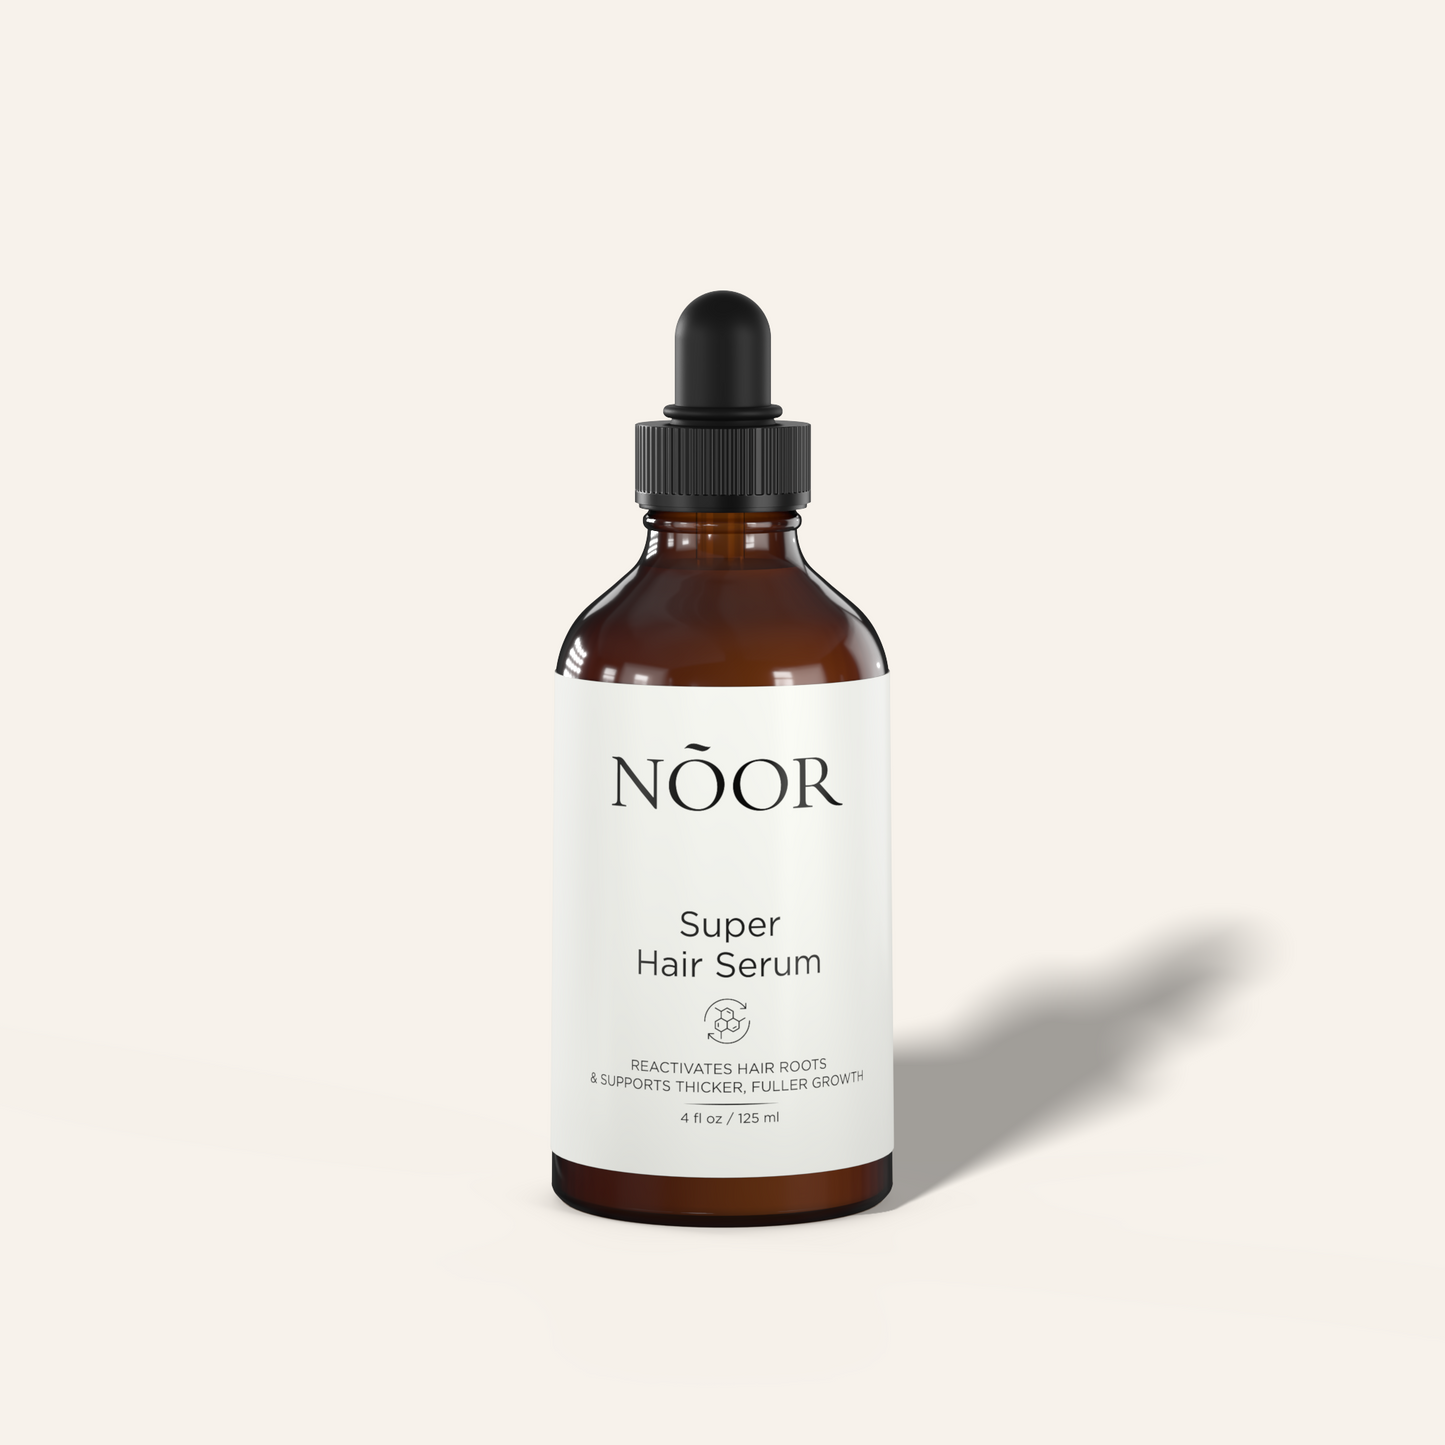 Super Hair Serum | 1 Month Supply - Special Offer + Free Shipping